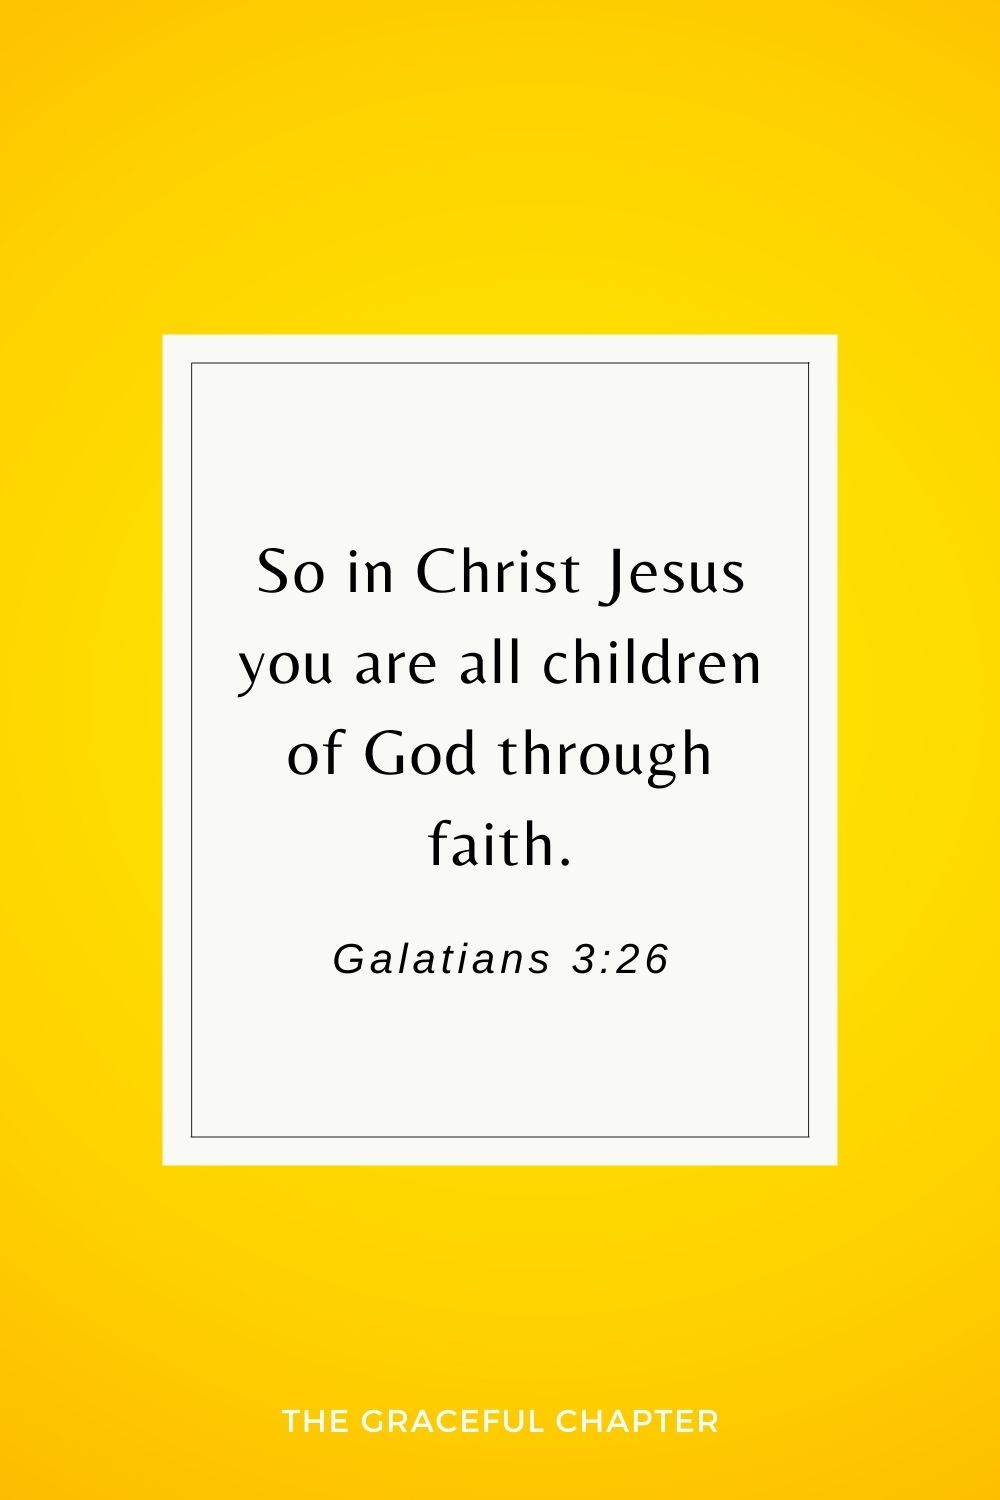 So in Christ Jesus you are all children of God through faith. Galatians 3:26